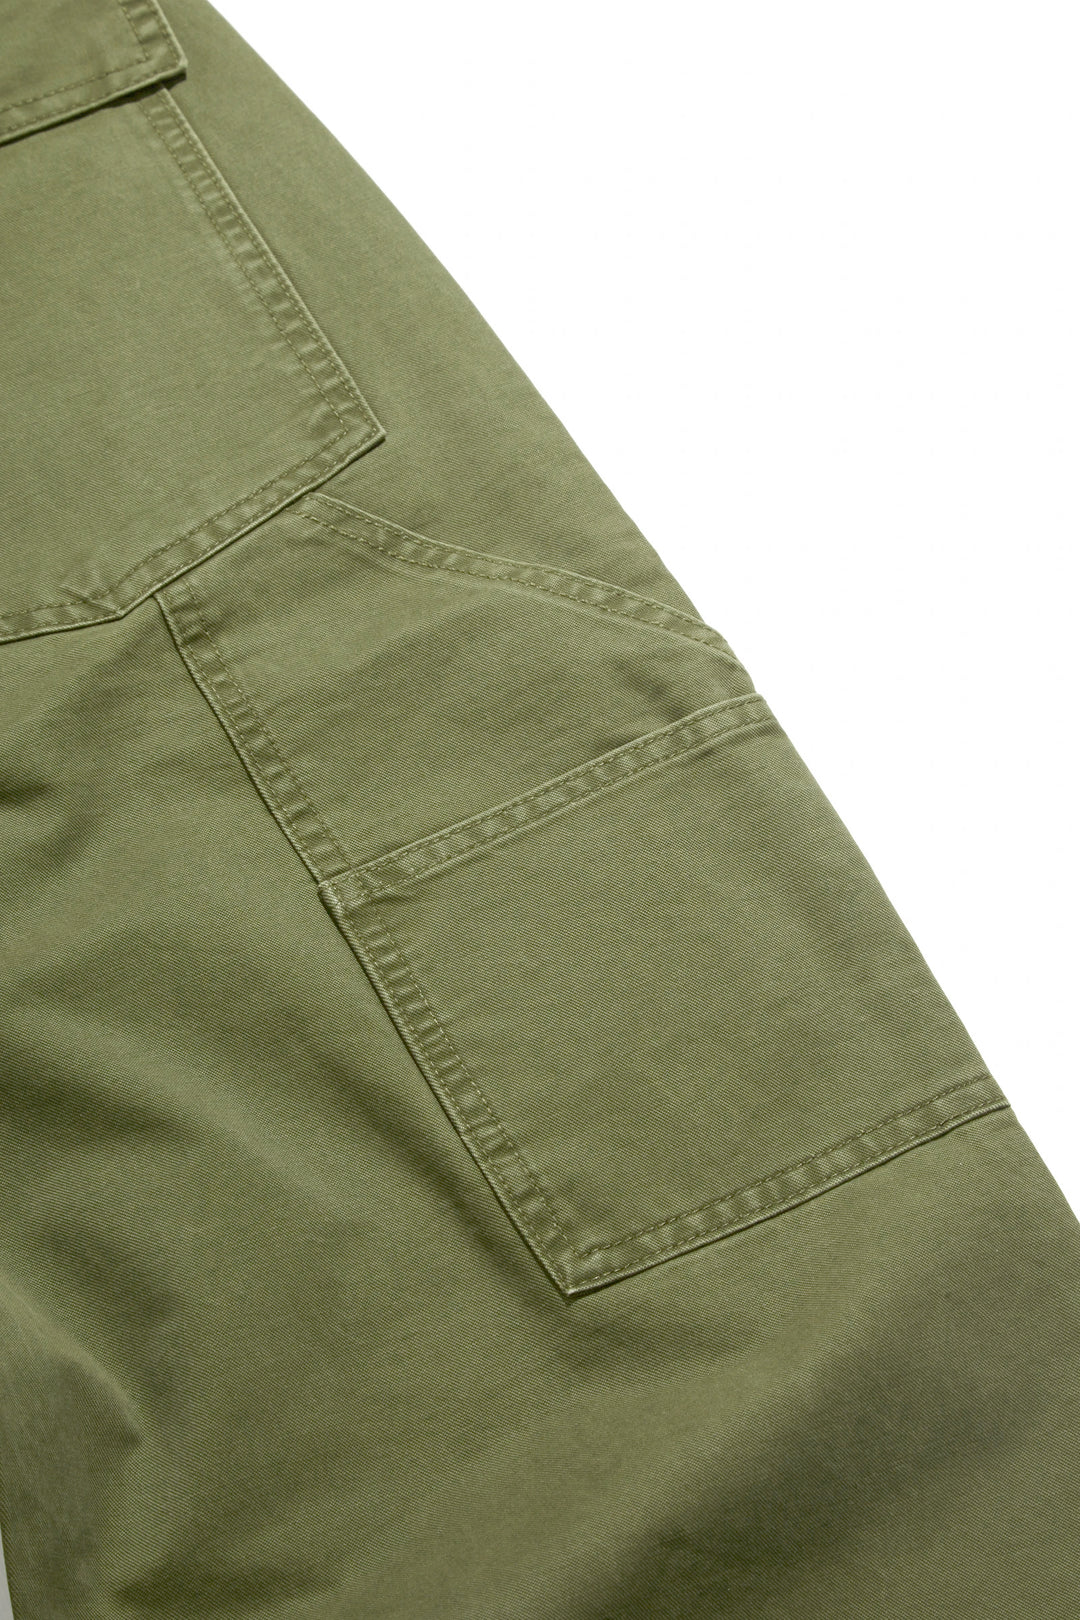 Blacksmith - Sowing Field Pants - Olive – Blacksmith Store